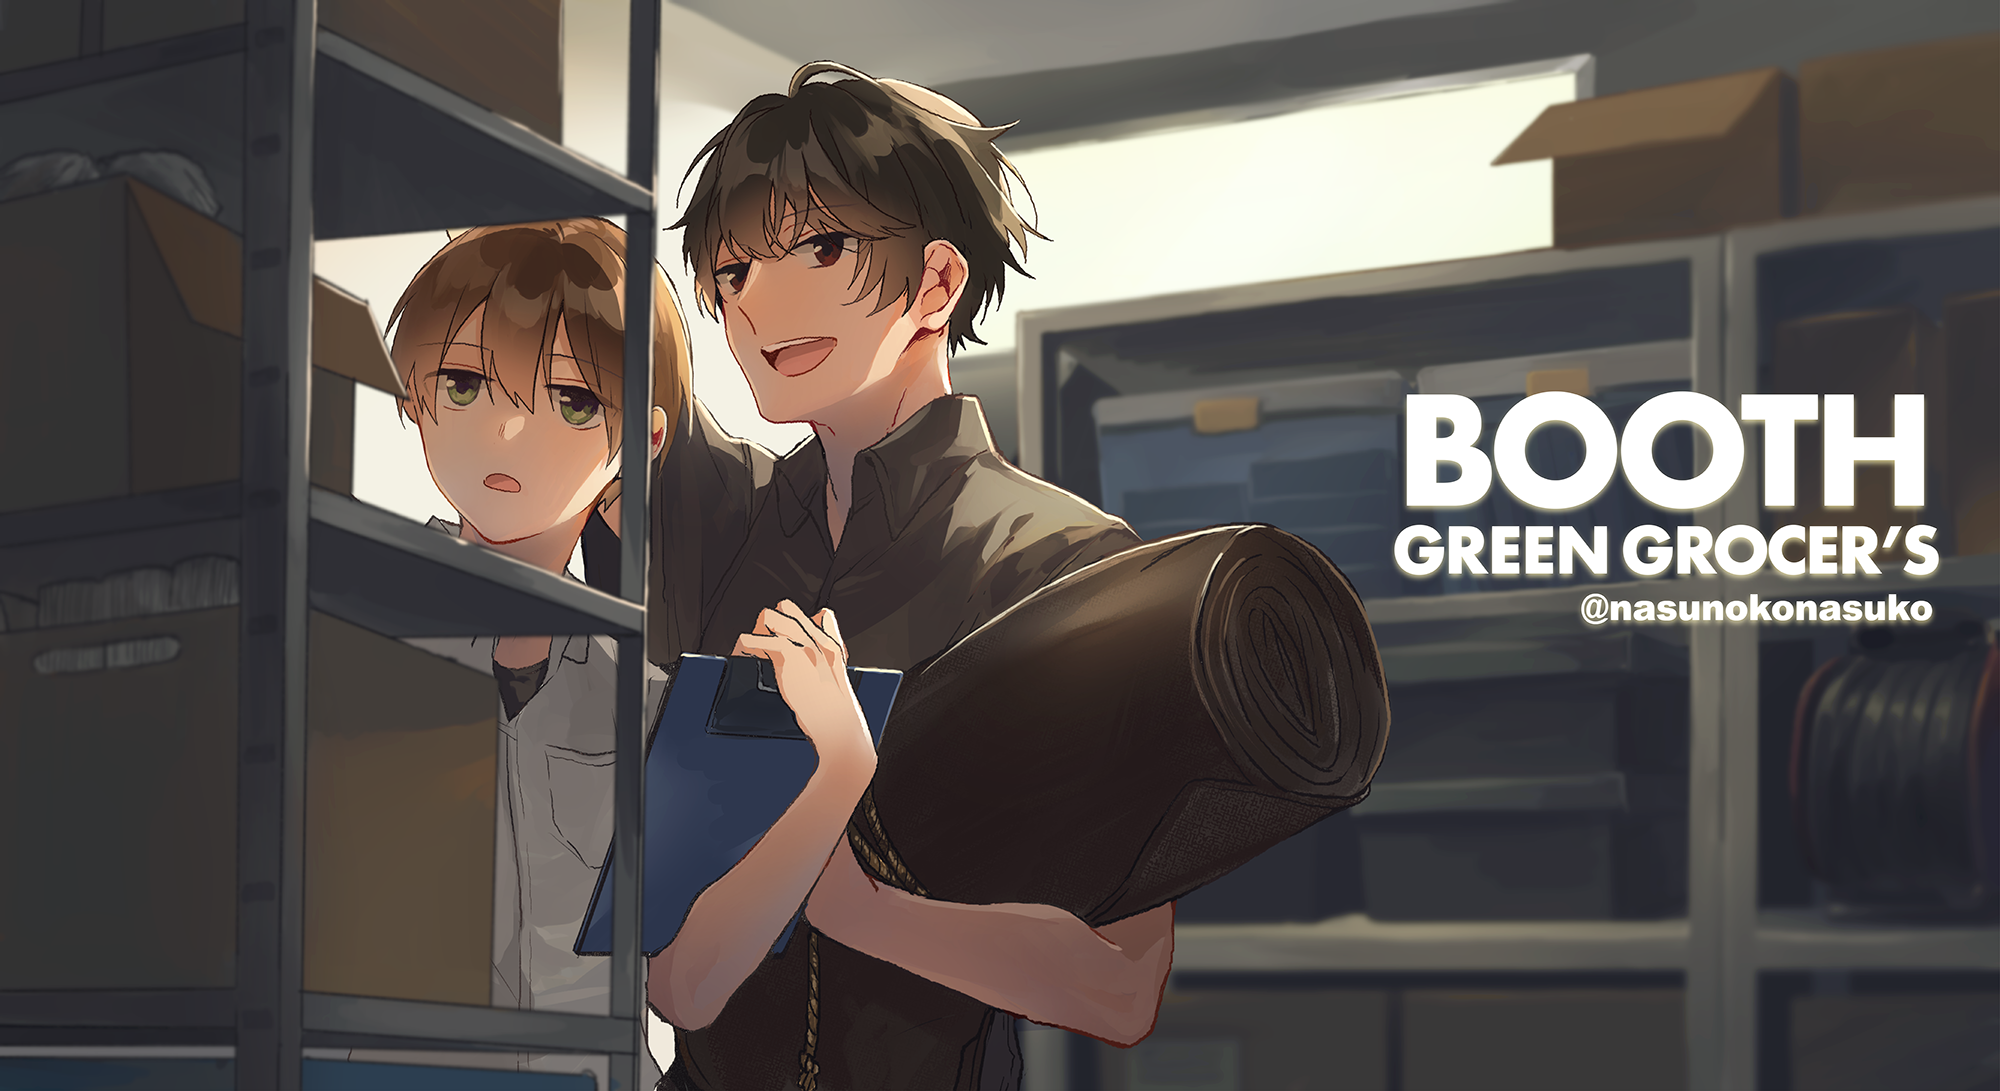  GREEN GROCER'S